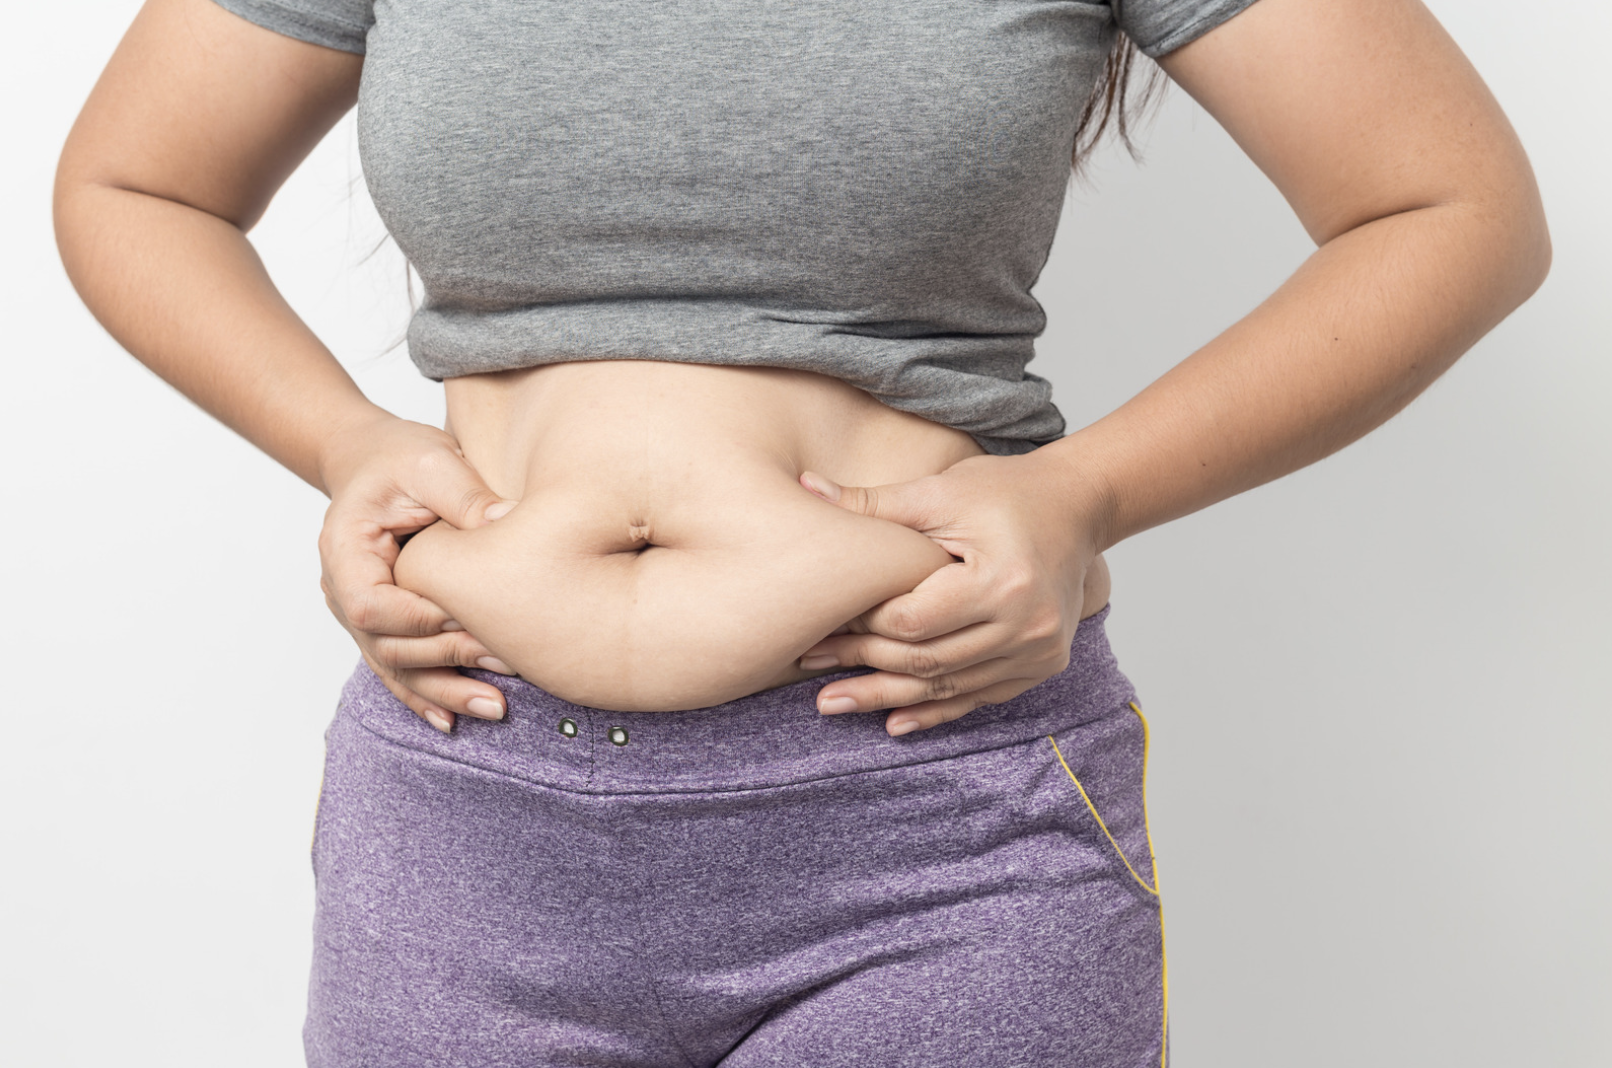 CoolSculpting vs. Tummy Tuck: Which is right for you?